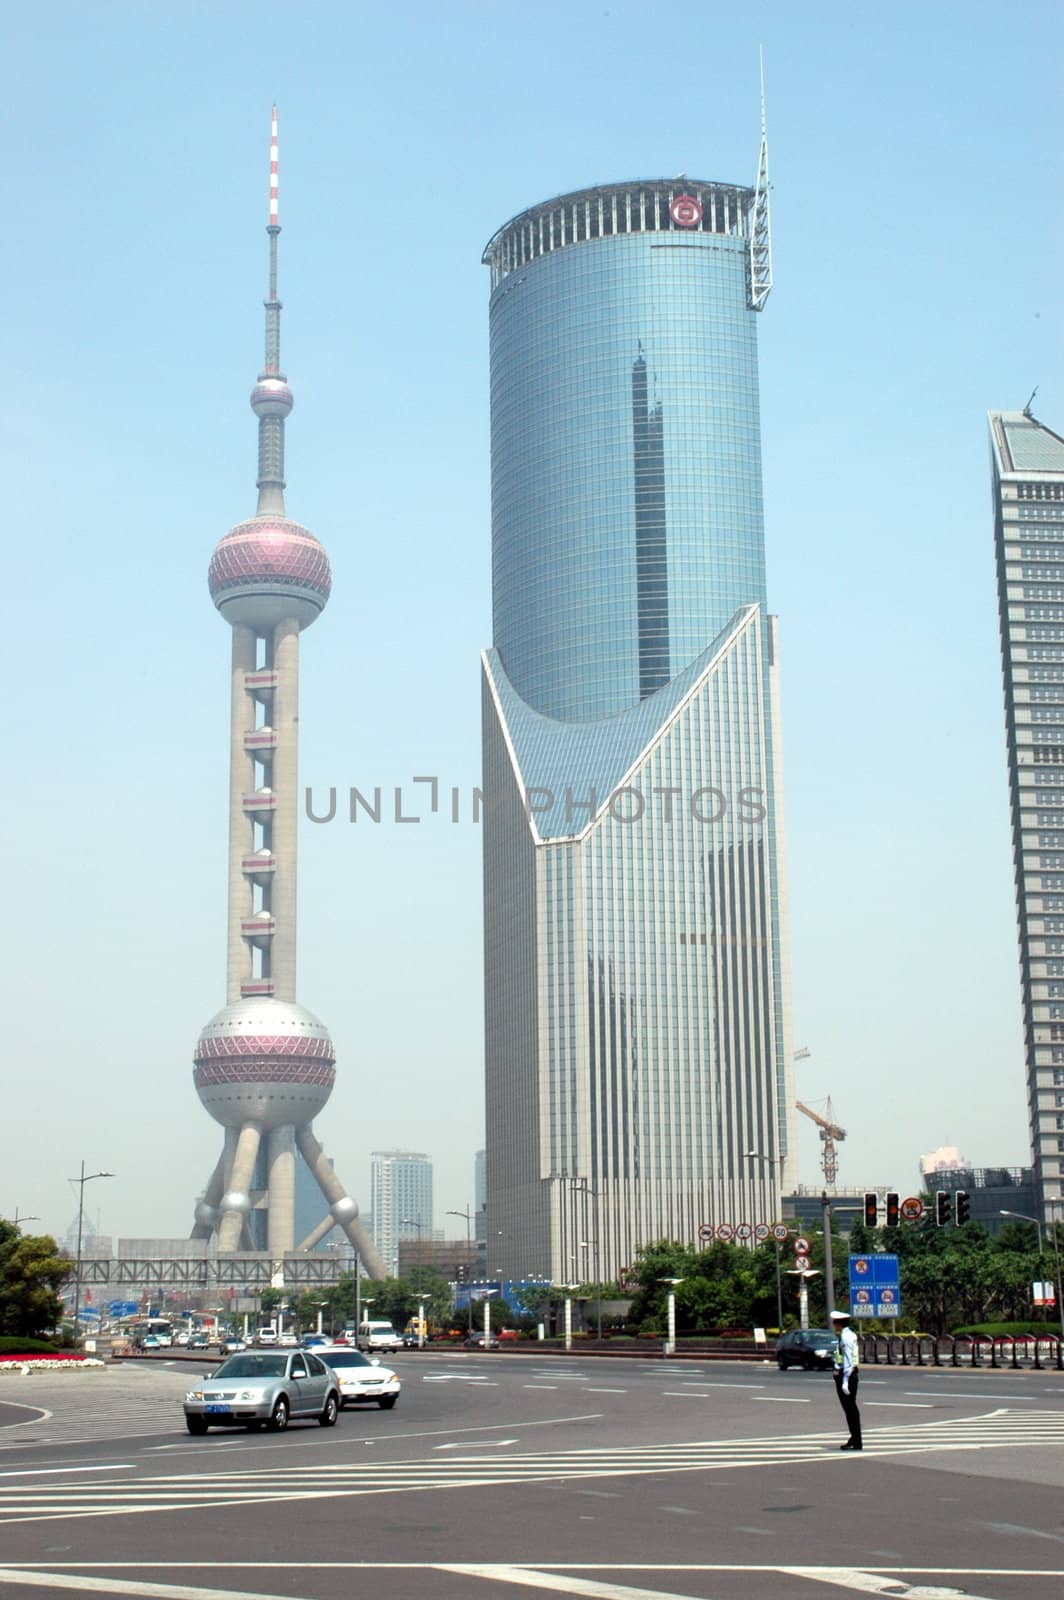 Pudong area in Shanghai with modern skyscrapers and famous Orient Pearl TV tower.